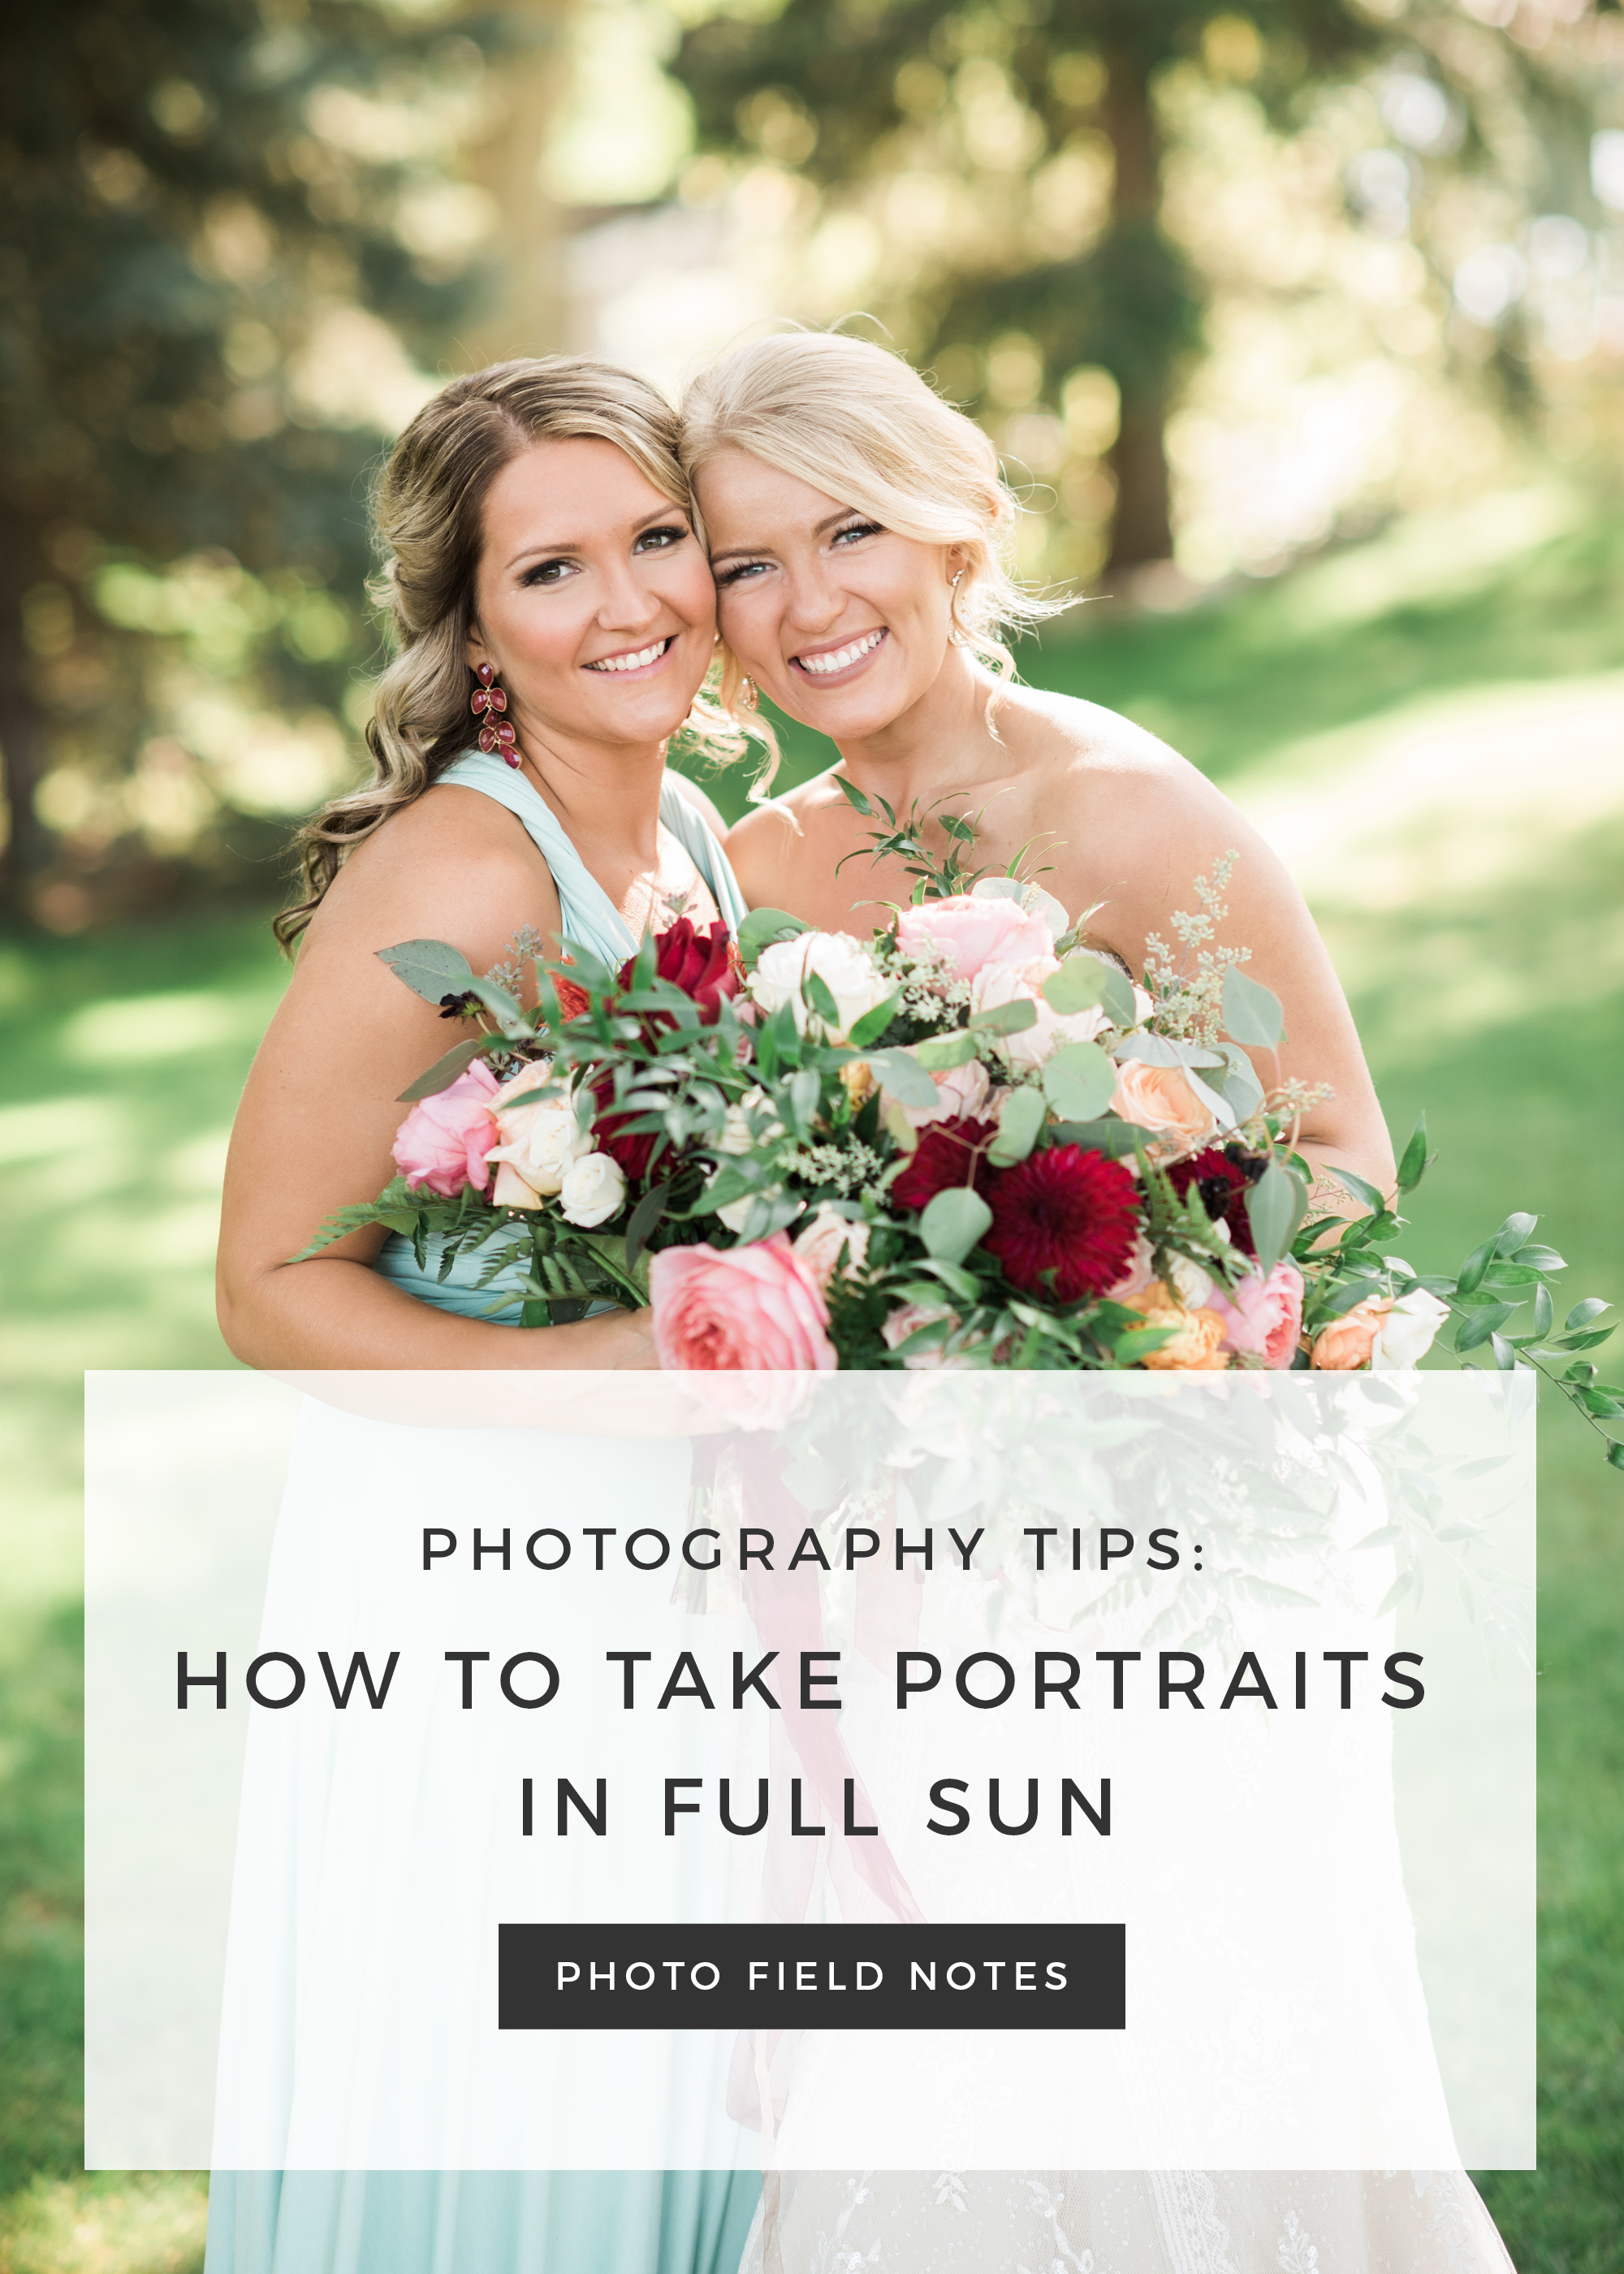 Photography Tips: How to take portraits in full sun